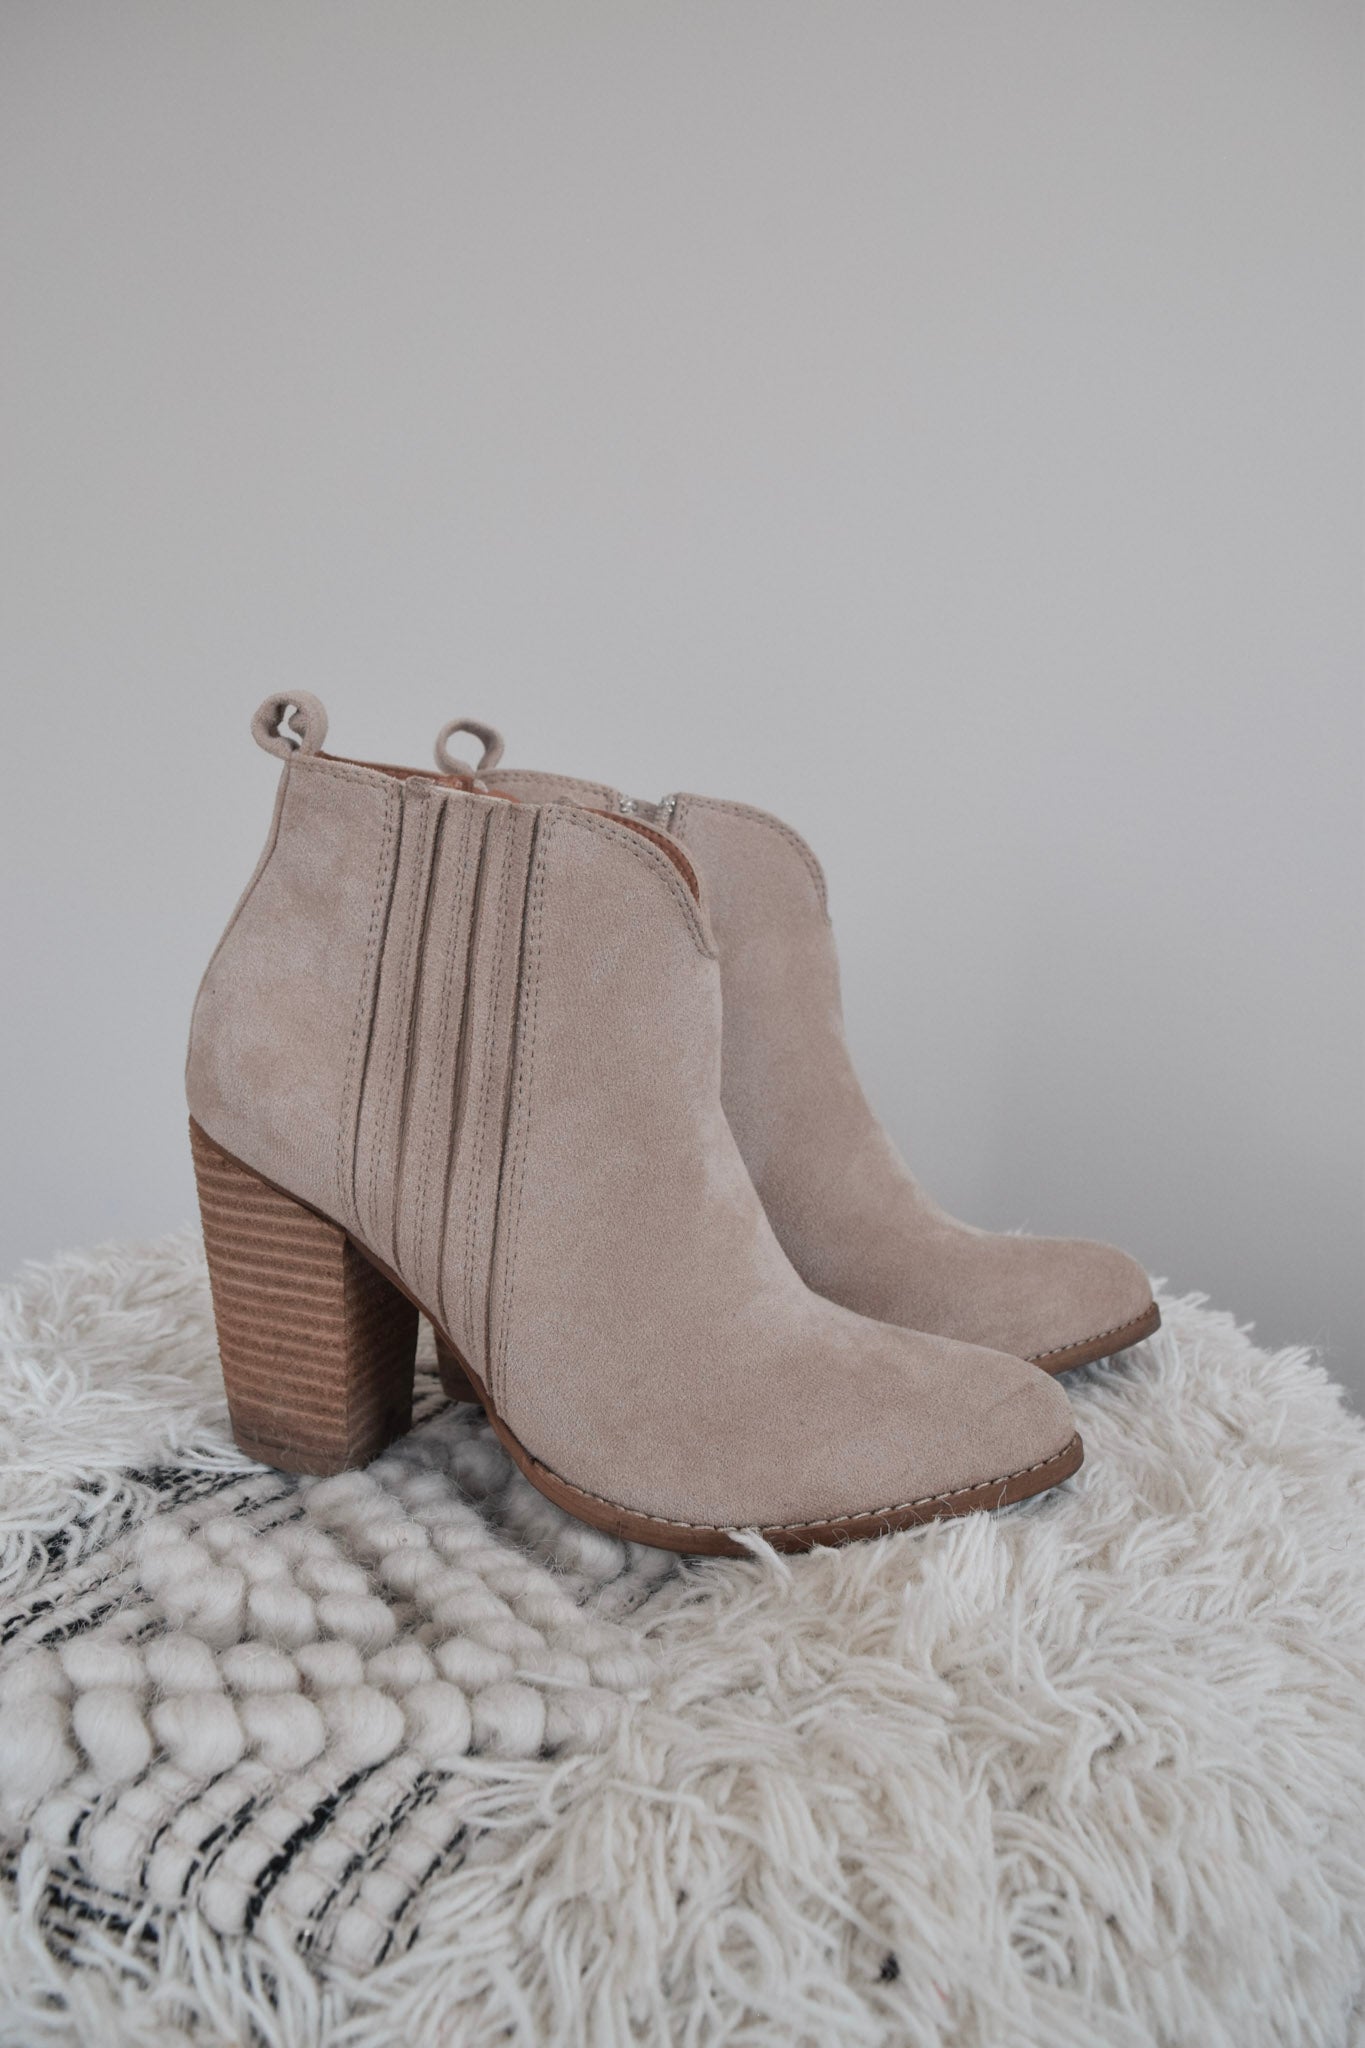 Taupe Bootie